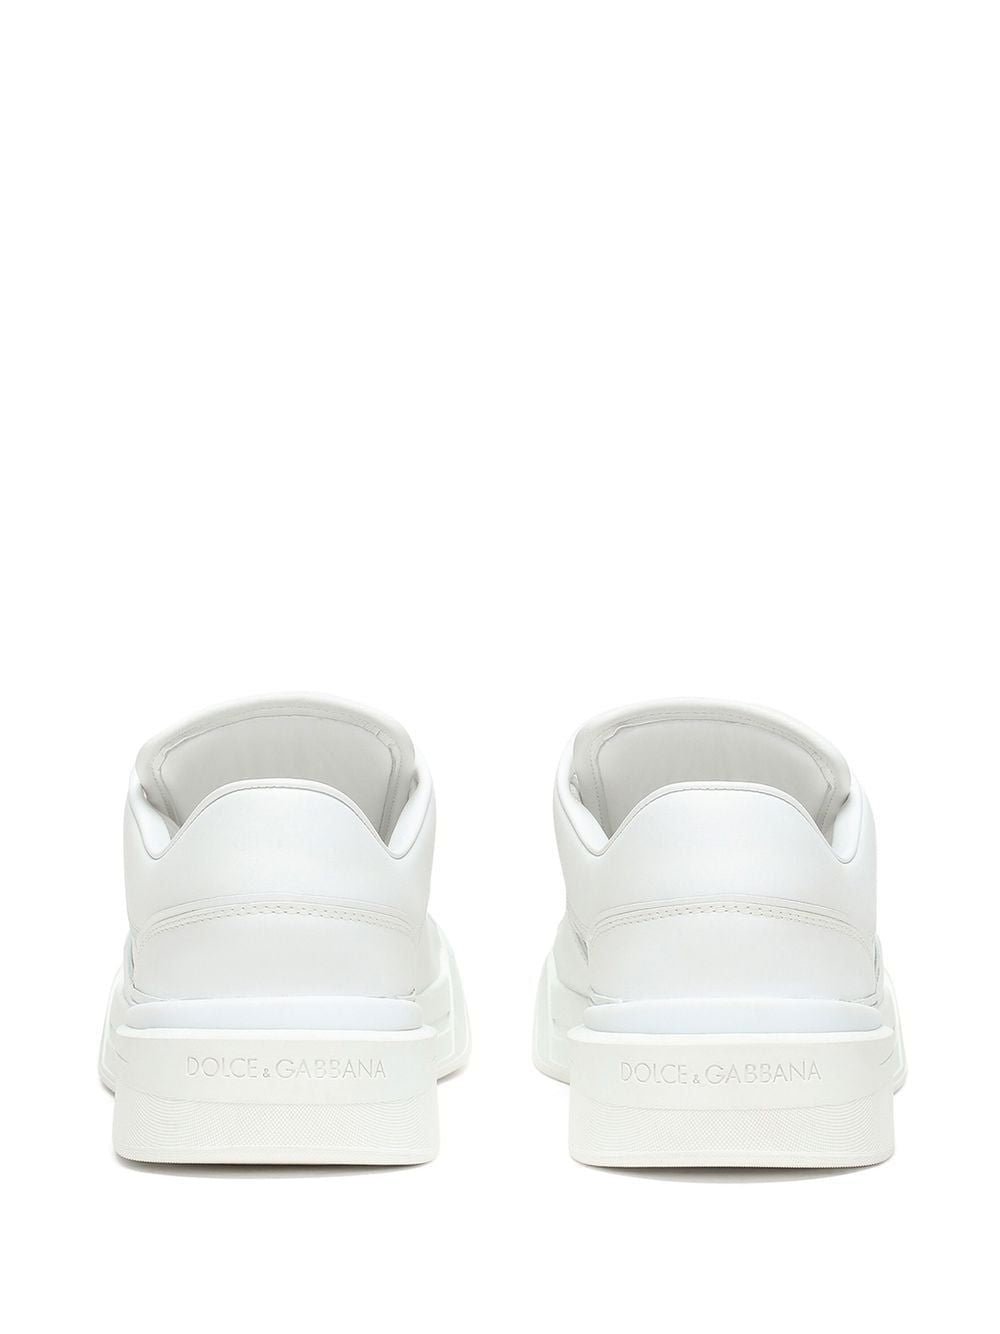 DOLCE & GABBANA NEW ROME Leather Sneakers for Men in White - SS23 Collection